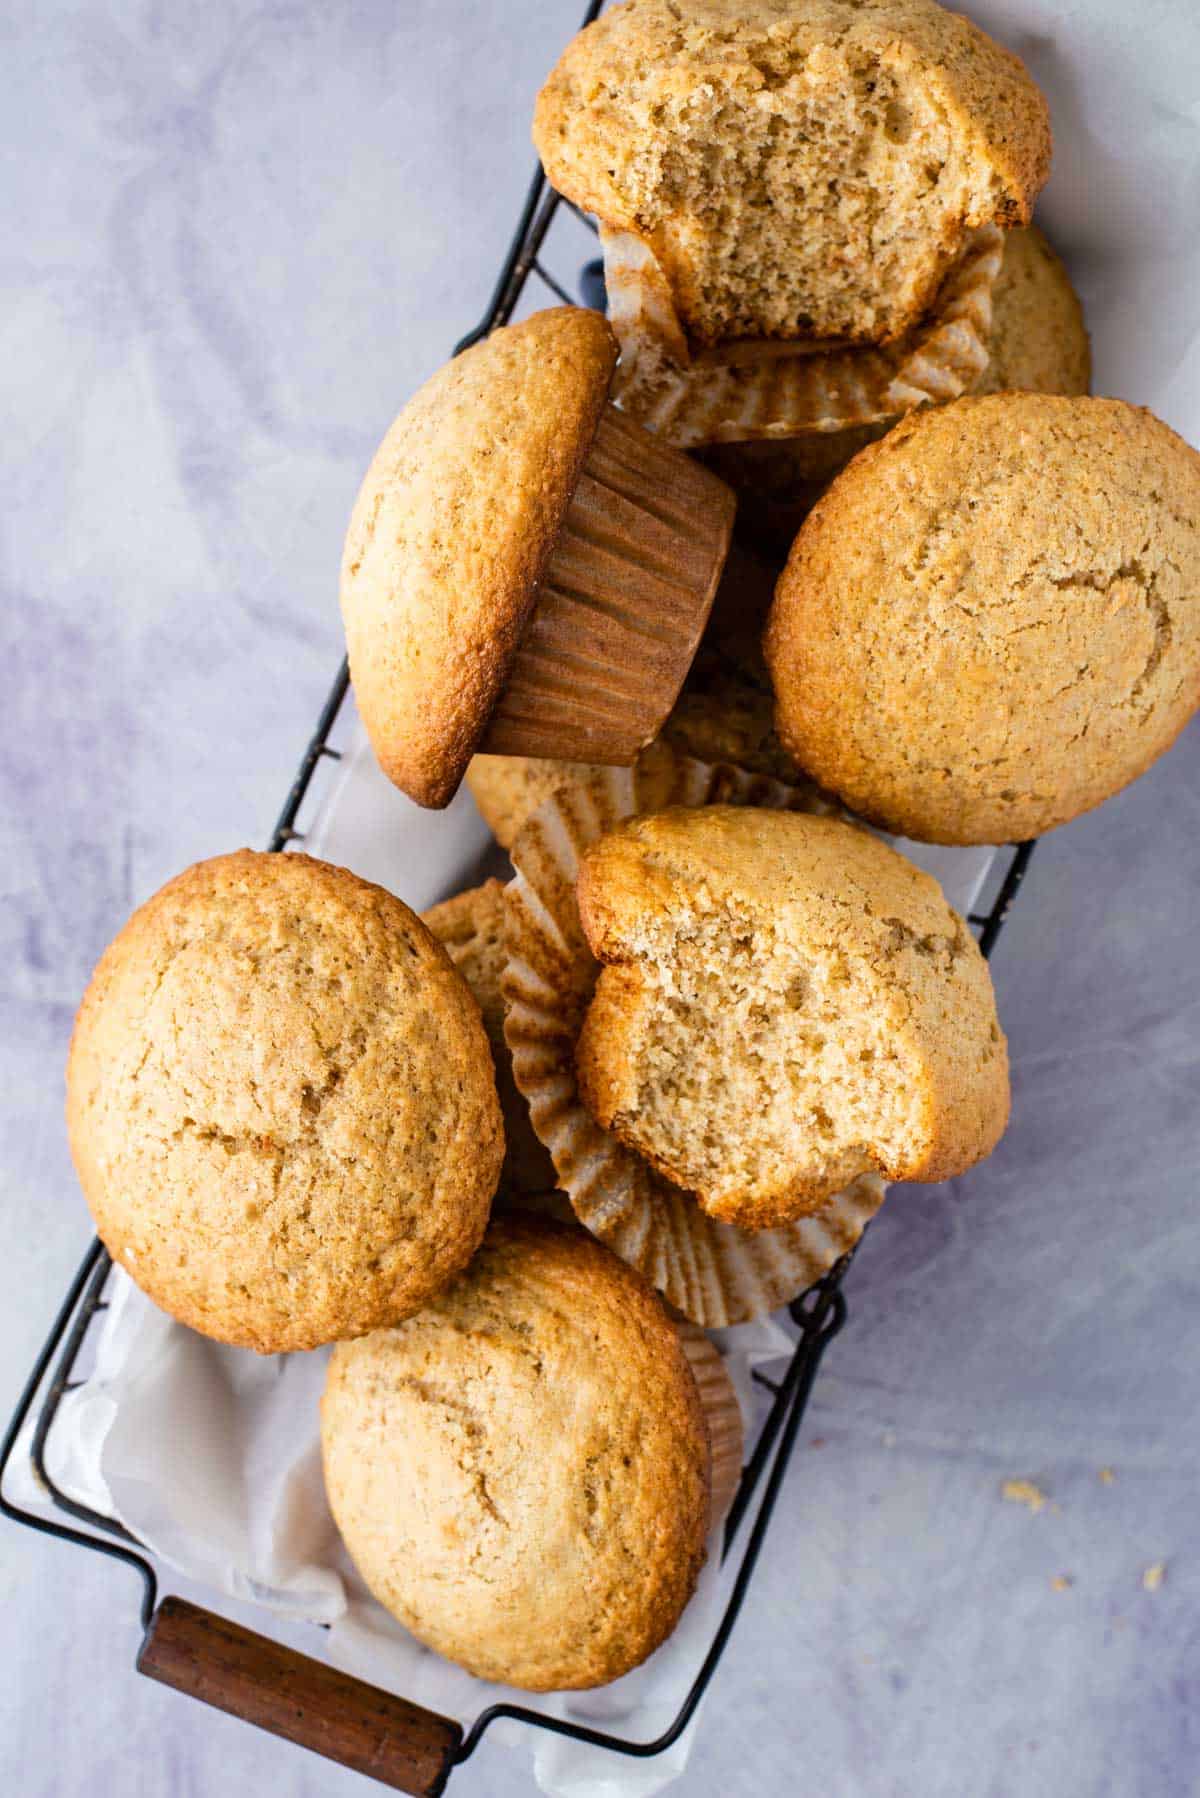 a basket full of bran muffins, some whole and some with a white out